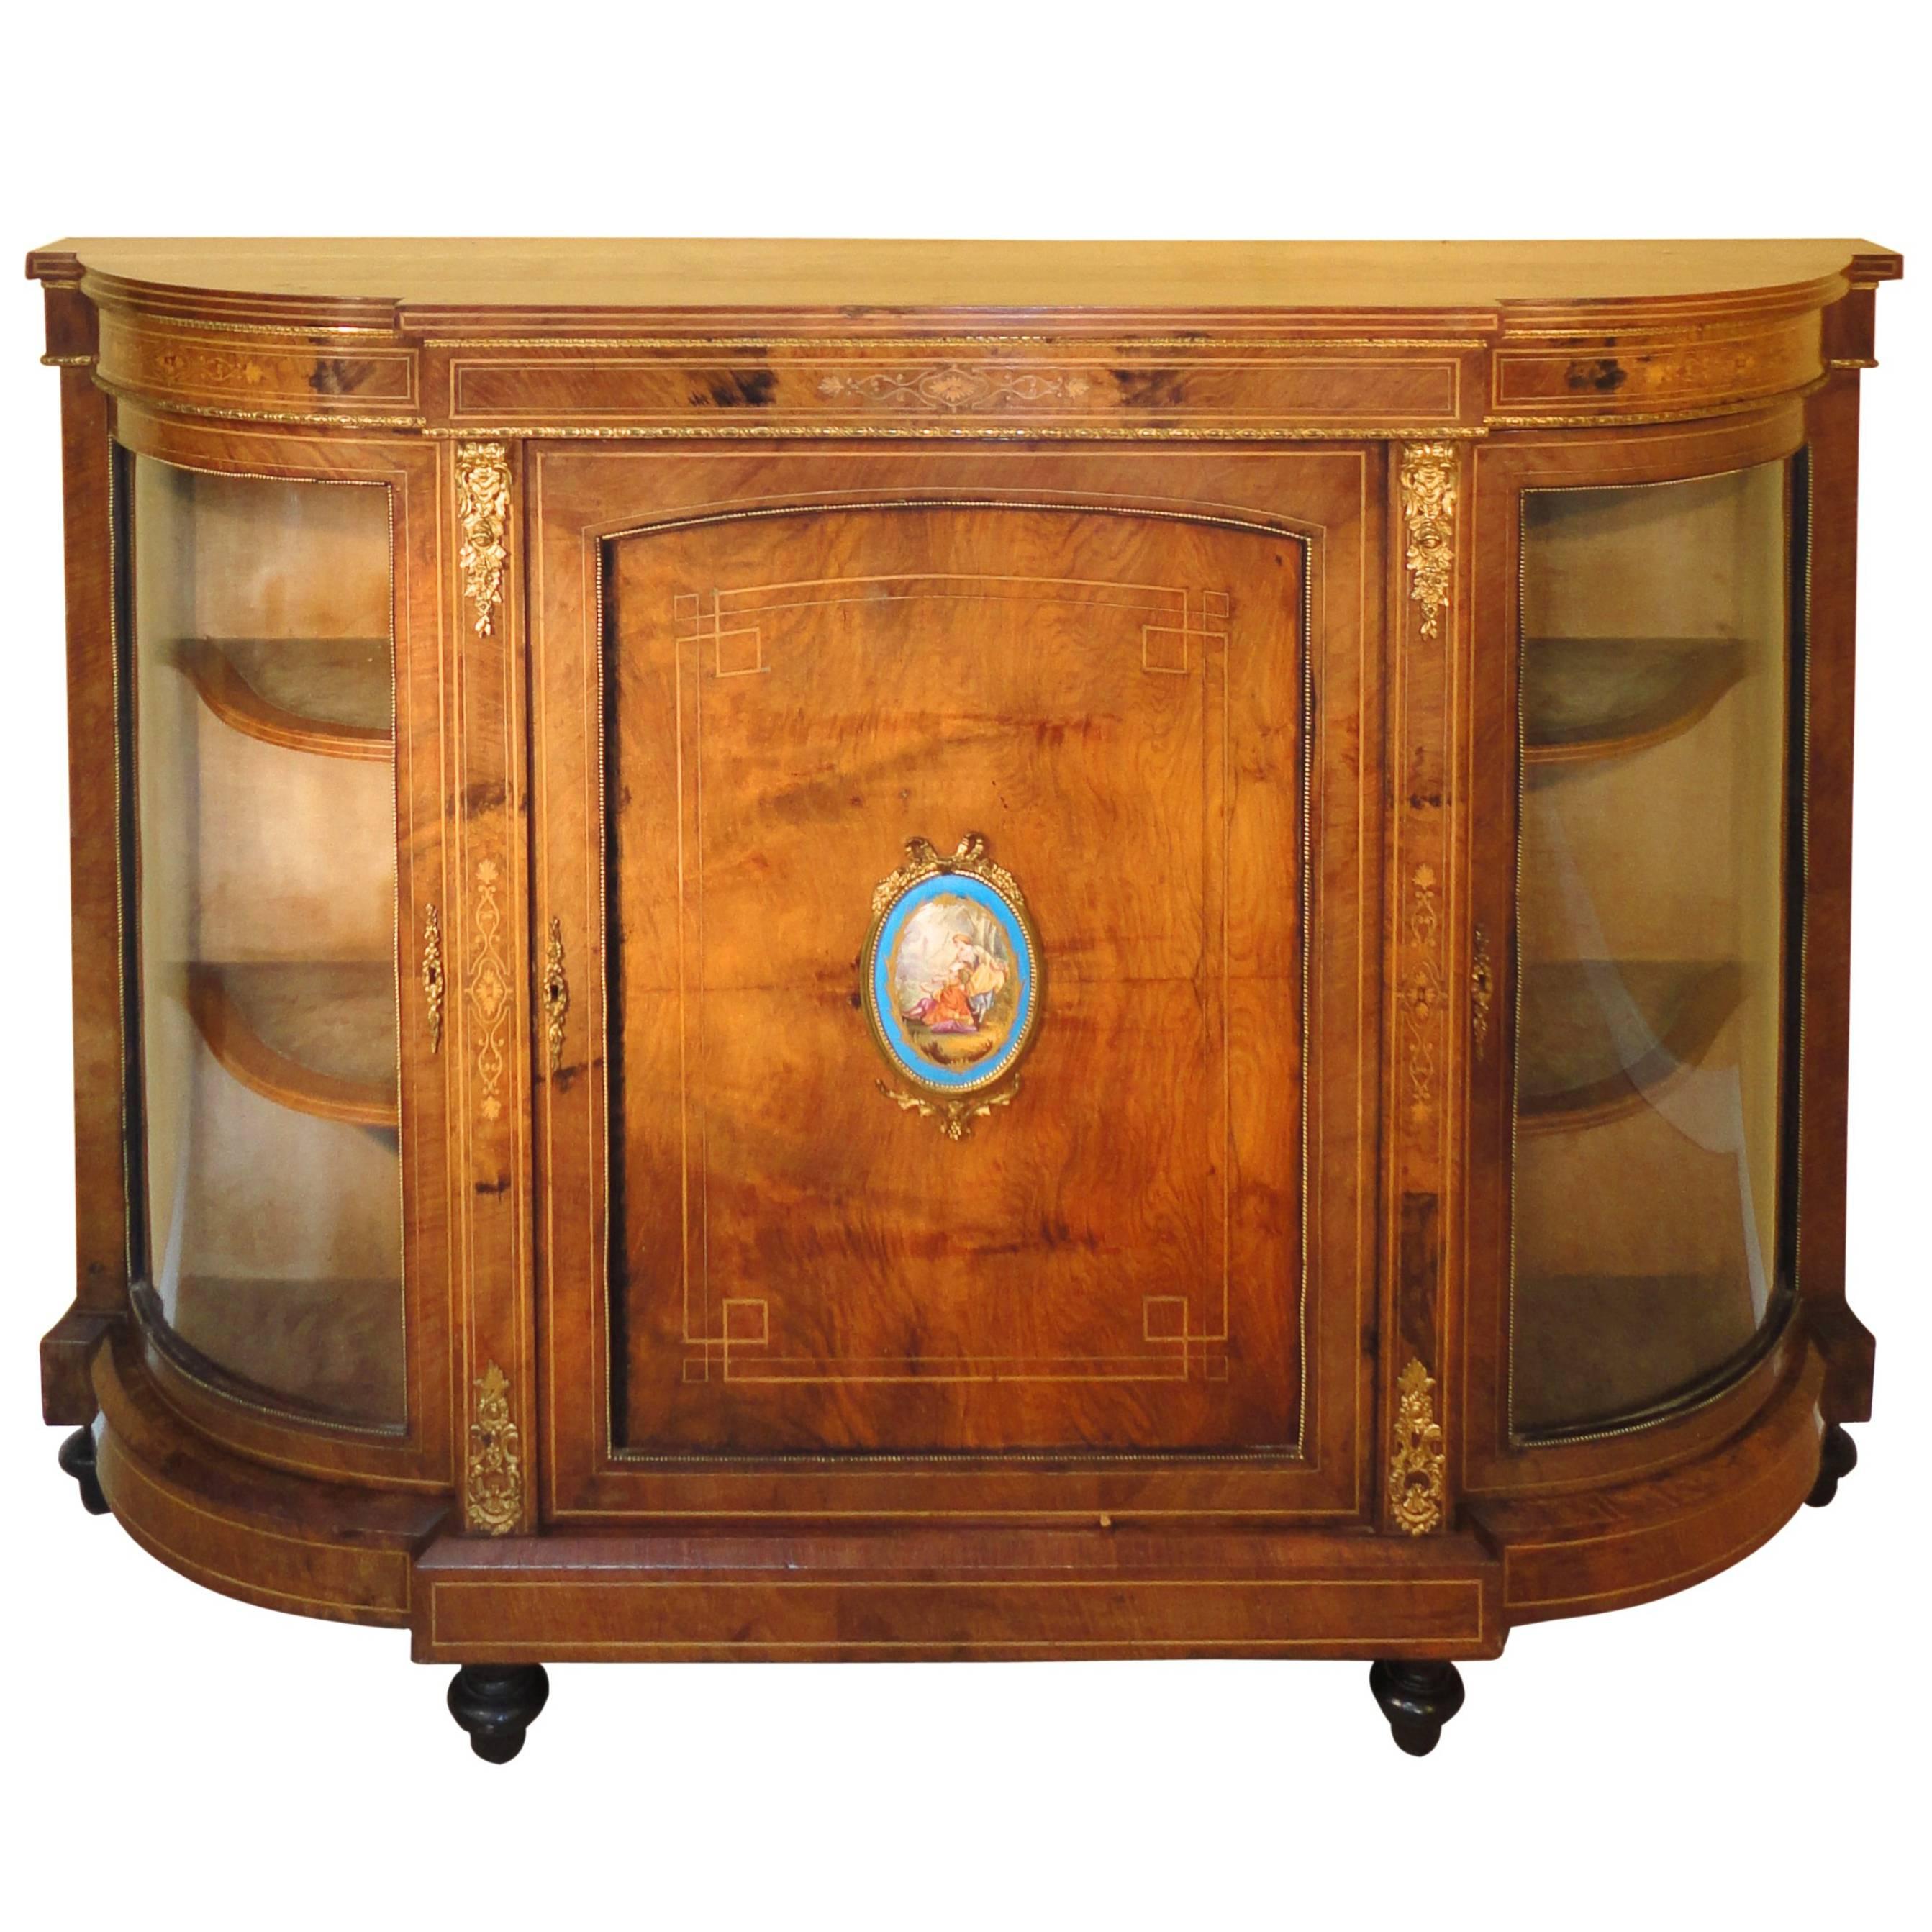 Victorian Burr Walnut and Marquetry Inlaid Credenza